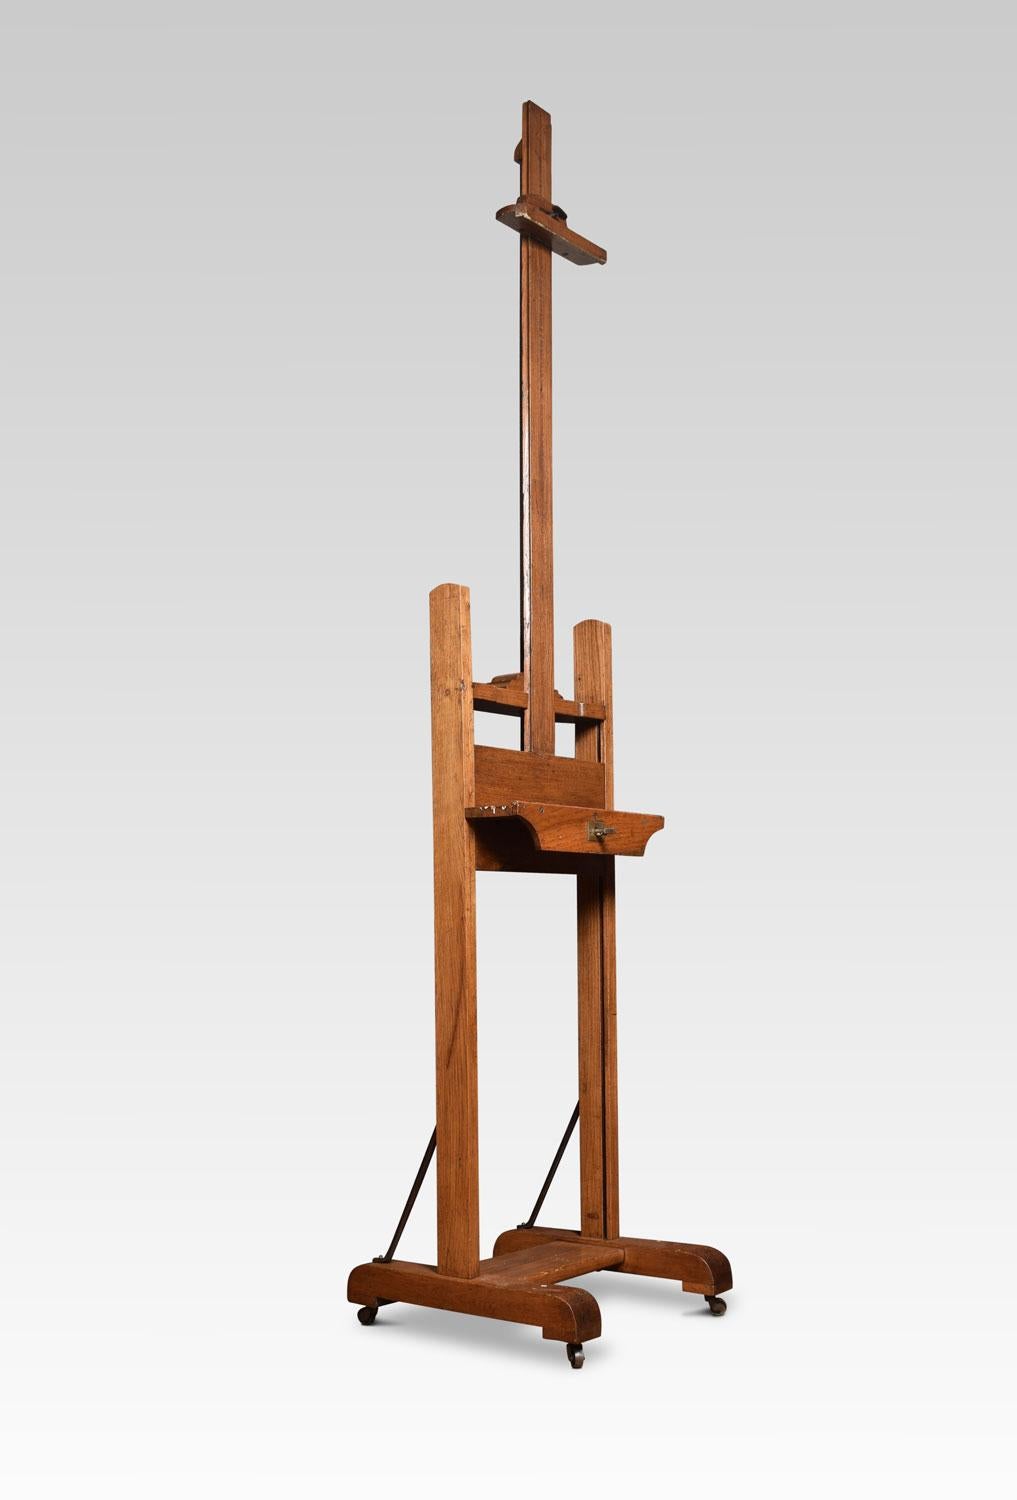 Oak artist’s adjustable studio easel raised up on trestle base terminating in casters.
Dimensions
Height 66 Inches adjustable to 99.5 Inches
Width 21 Inches
Depth 22 Inches